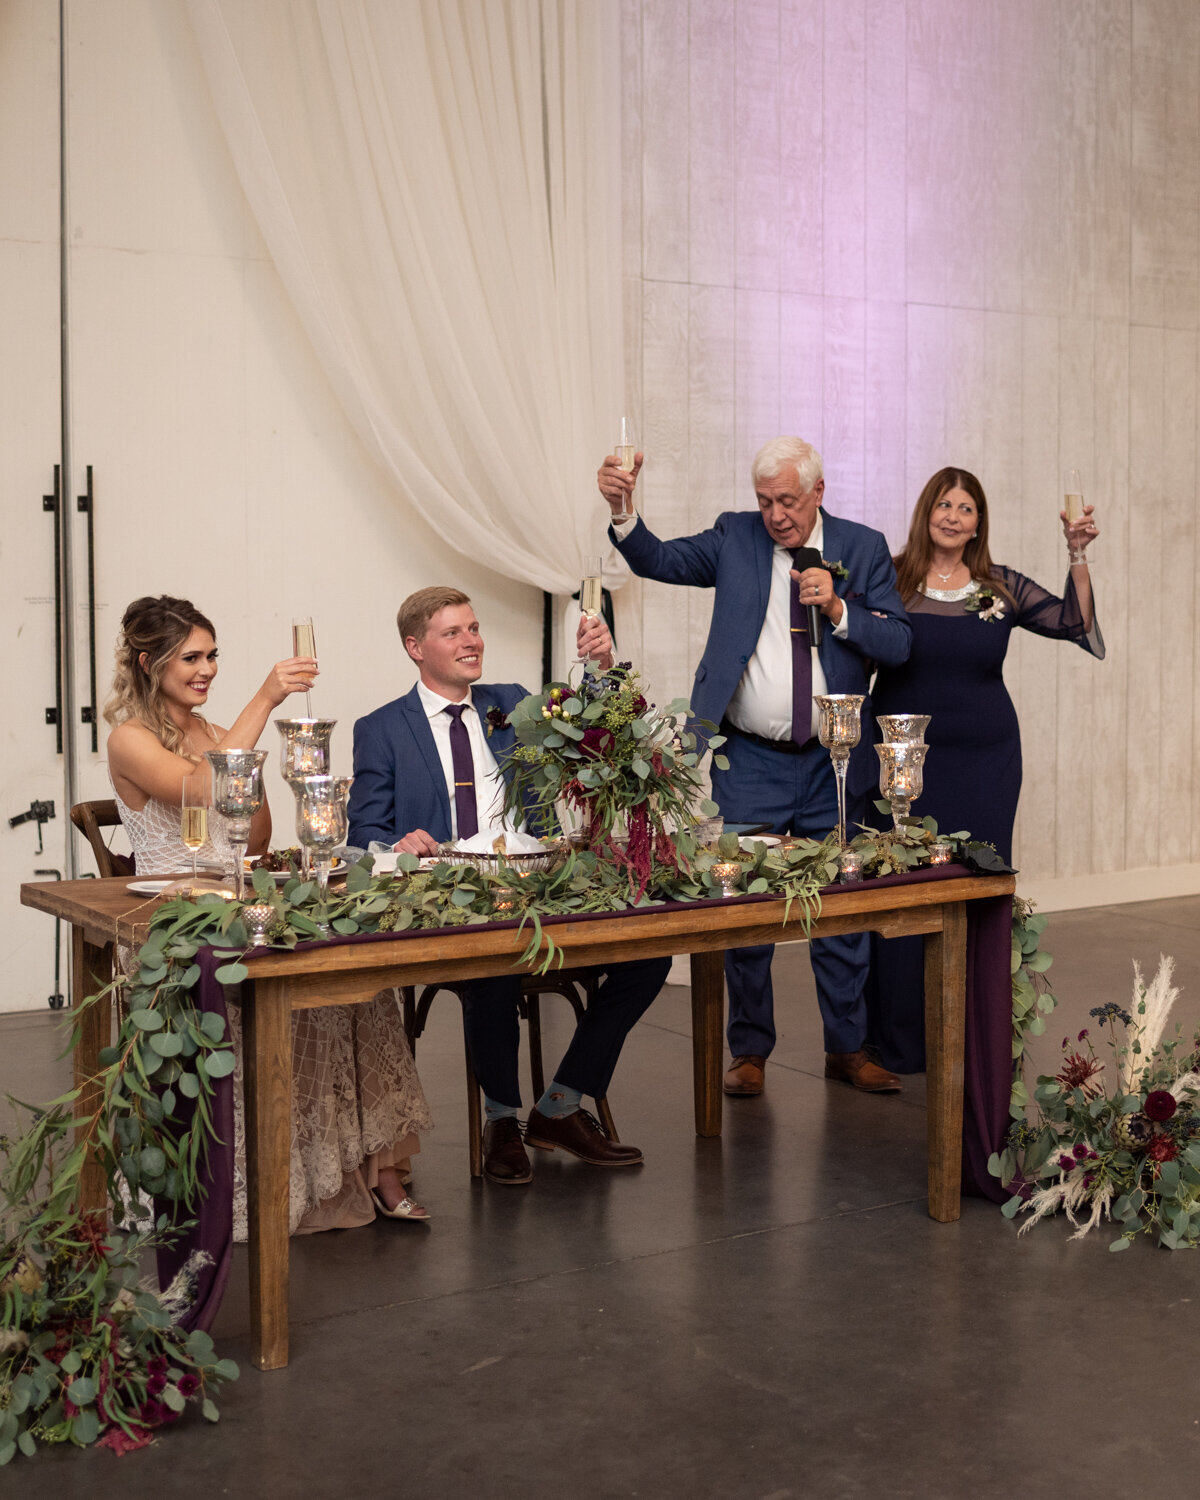 Bride's parents give a toast during wedding reception at The Woodlands